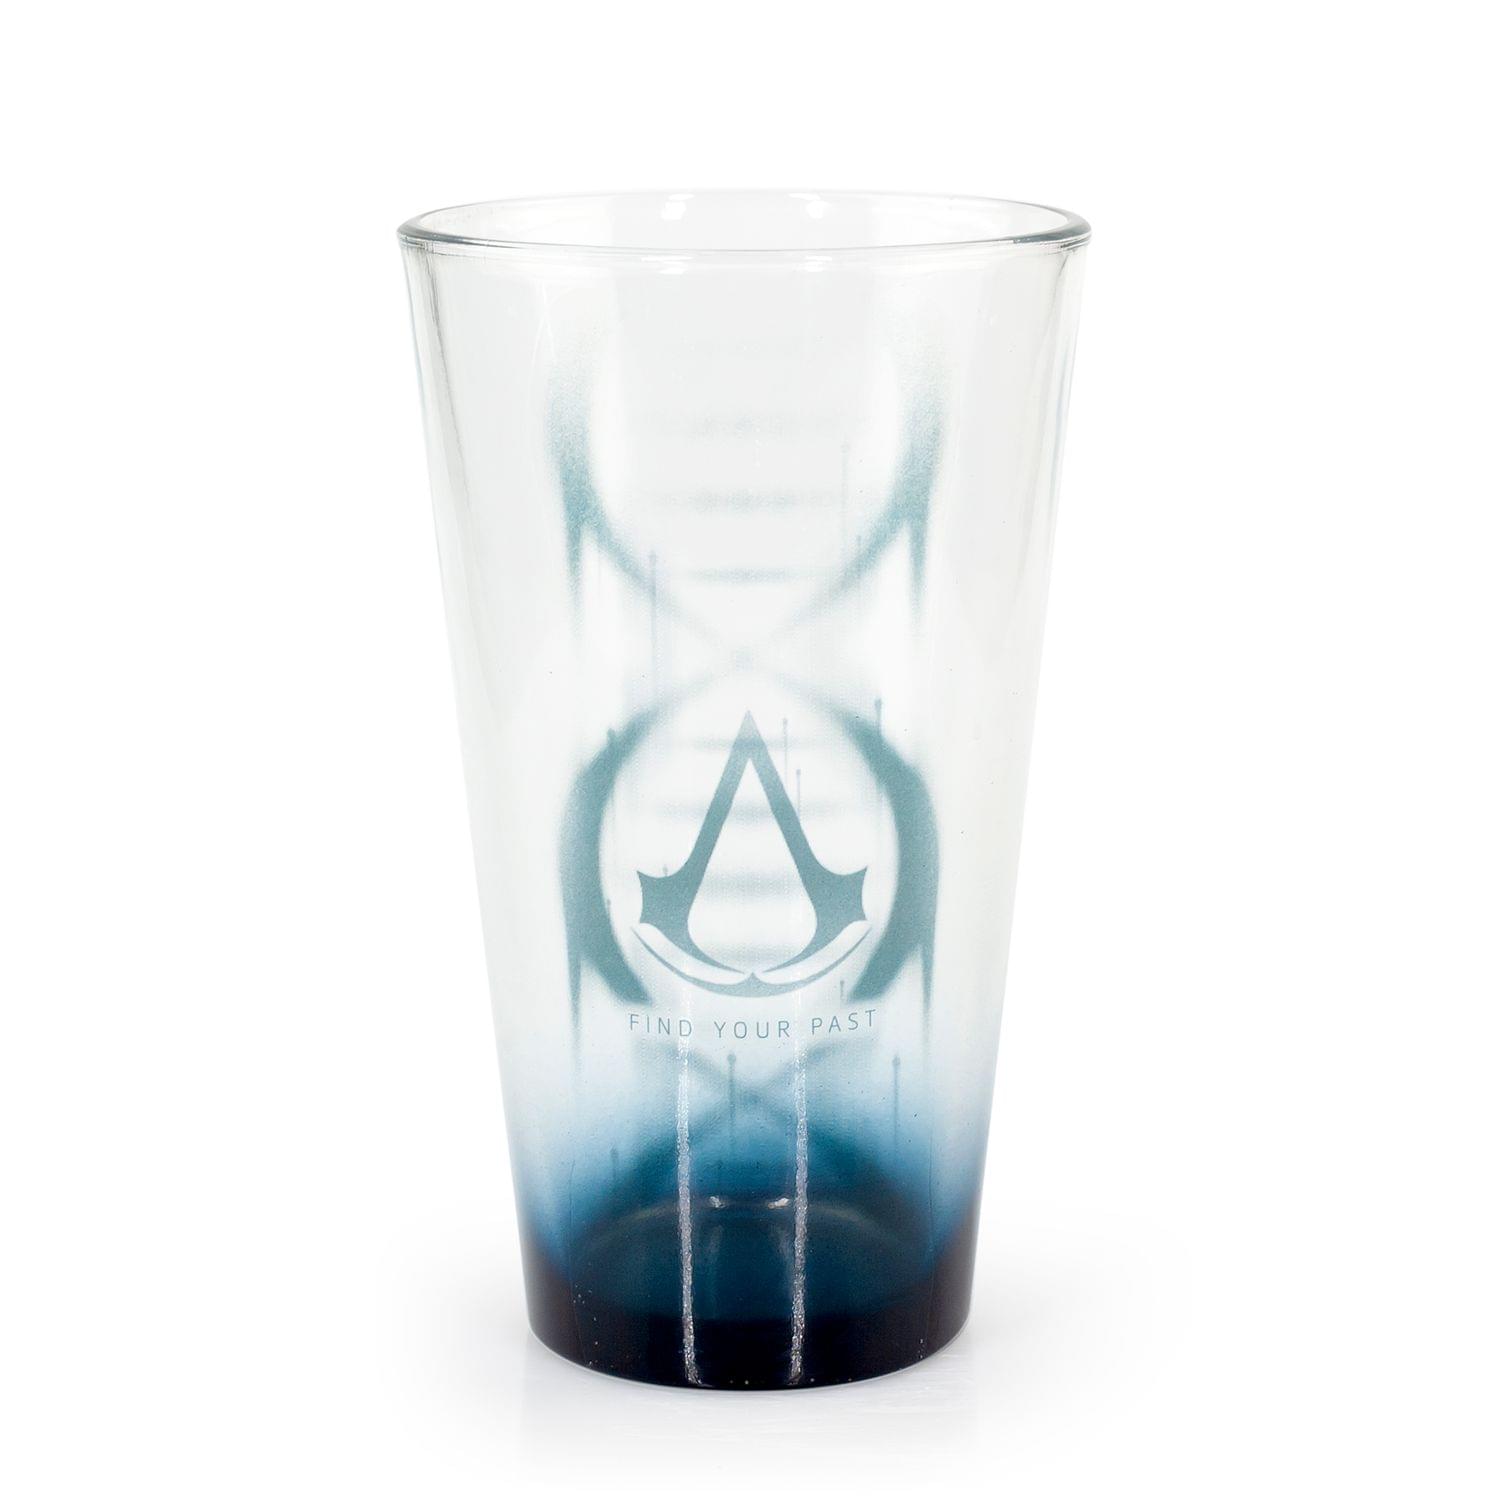 Assassin's Creed Pint Glass| Find Your Past Text| 16 oz